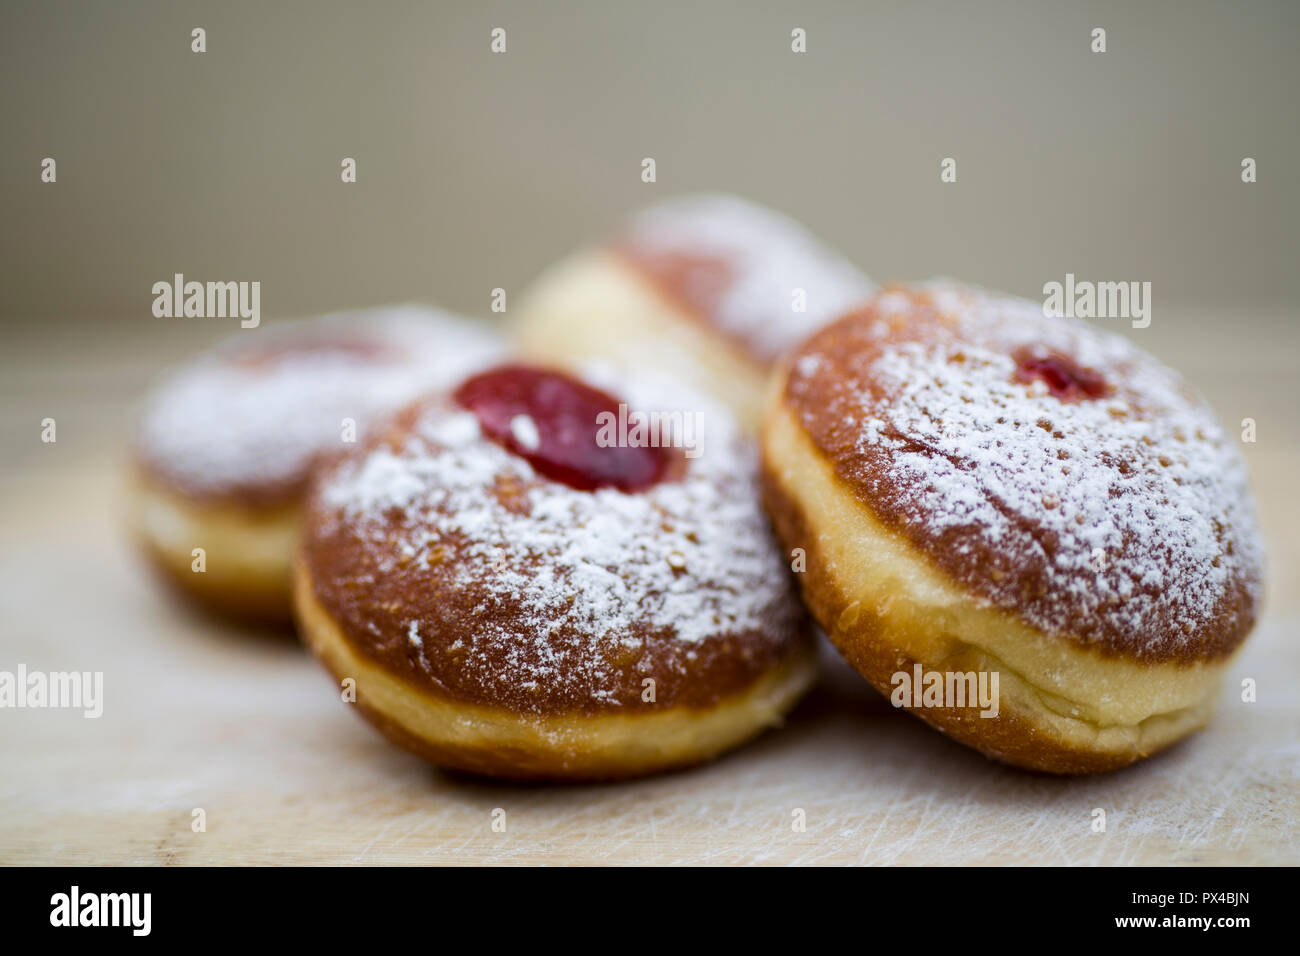 Traditional food for hanukkah is jelly doughnuts with sugar powder. Stock Photo